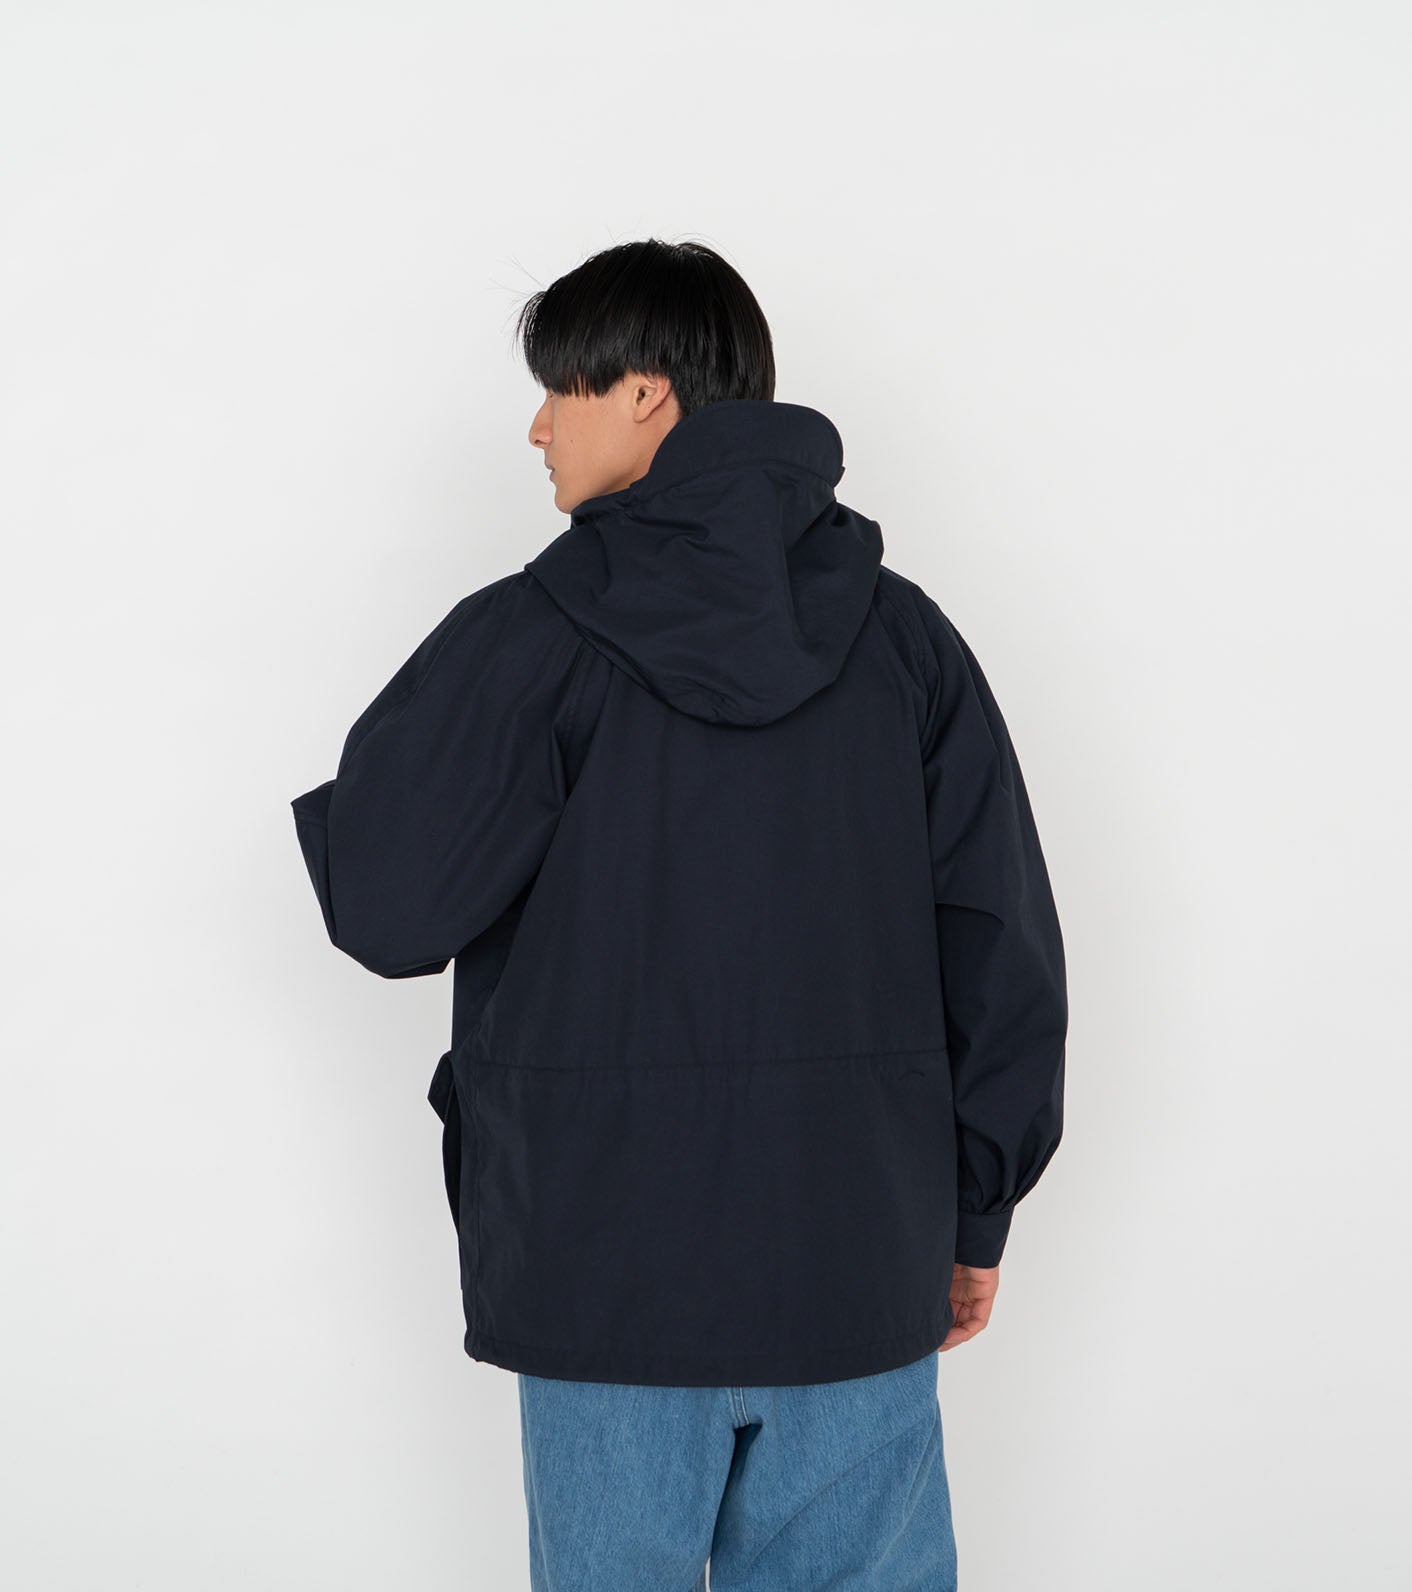 THE NORTH FACE PURPLE LABEL / 65/35 Mountain Parka